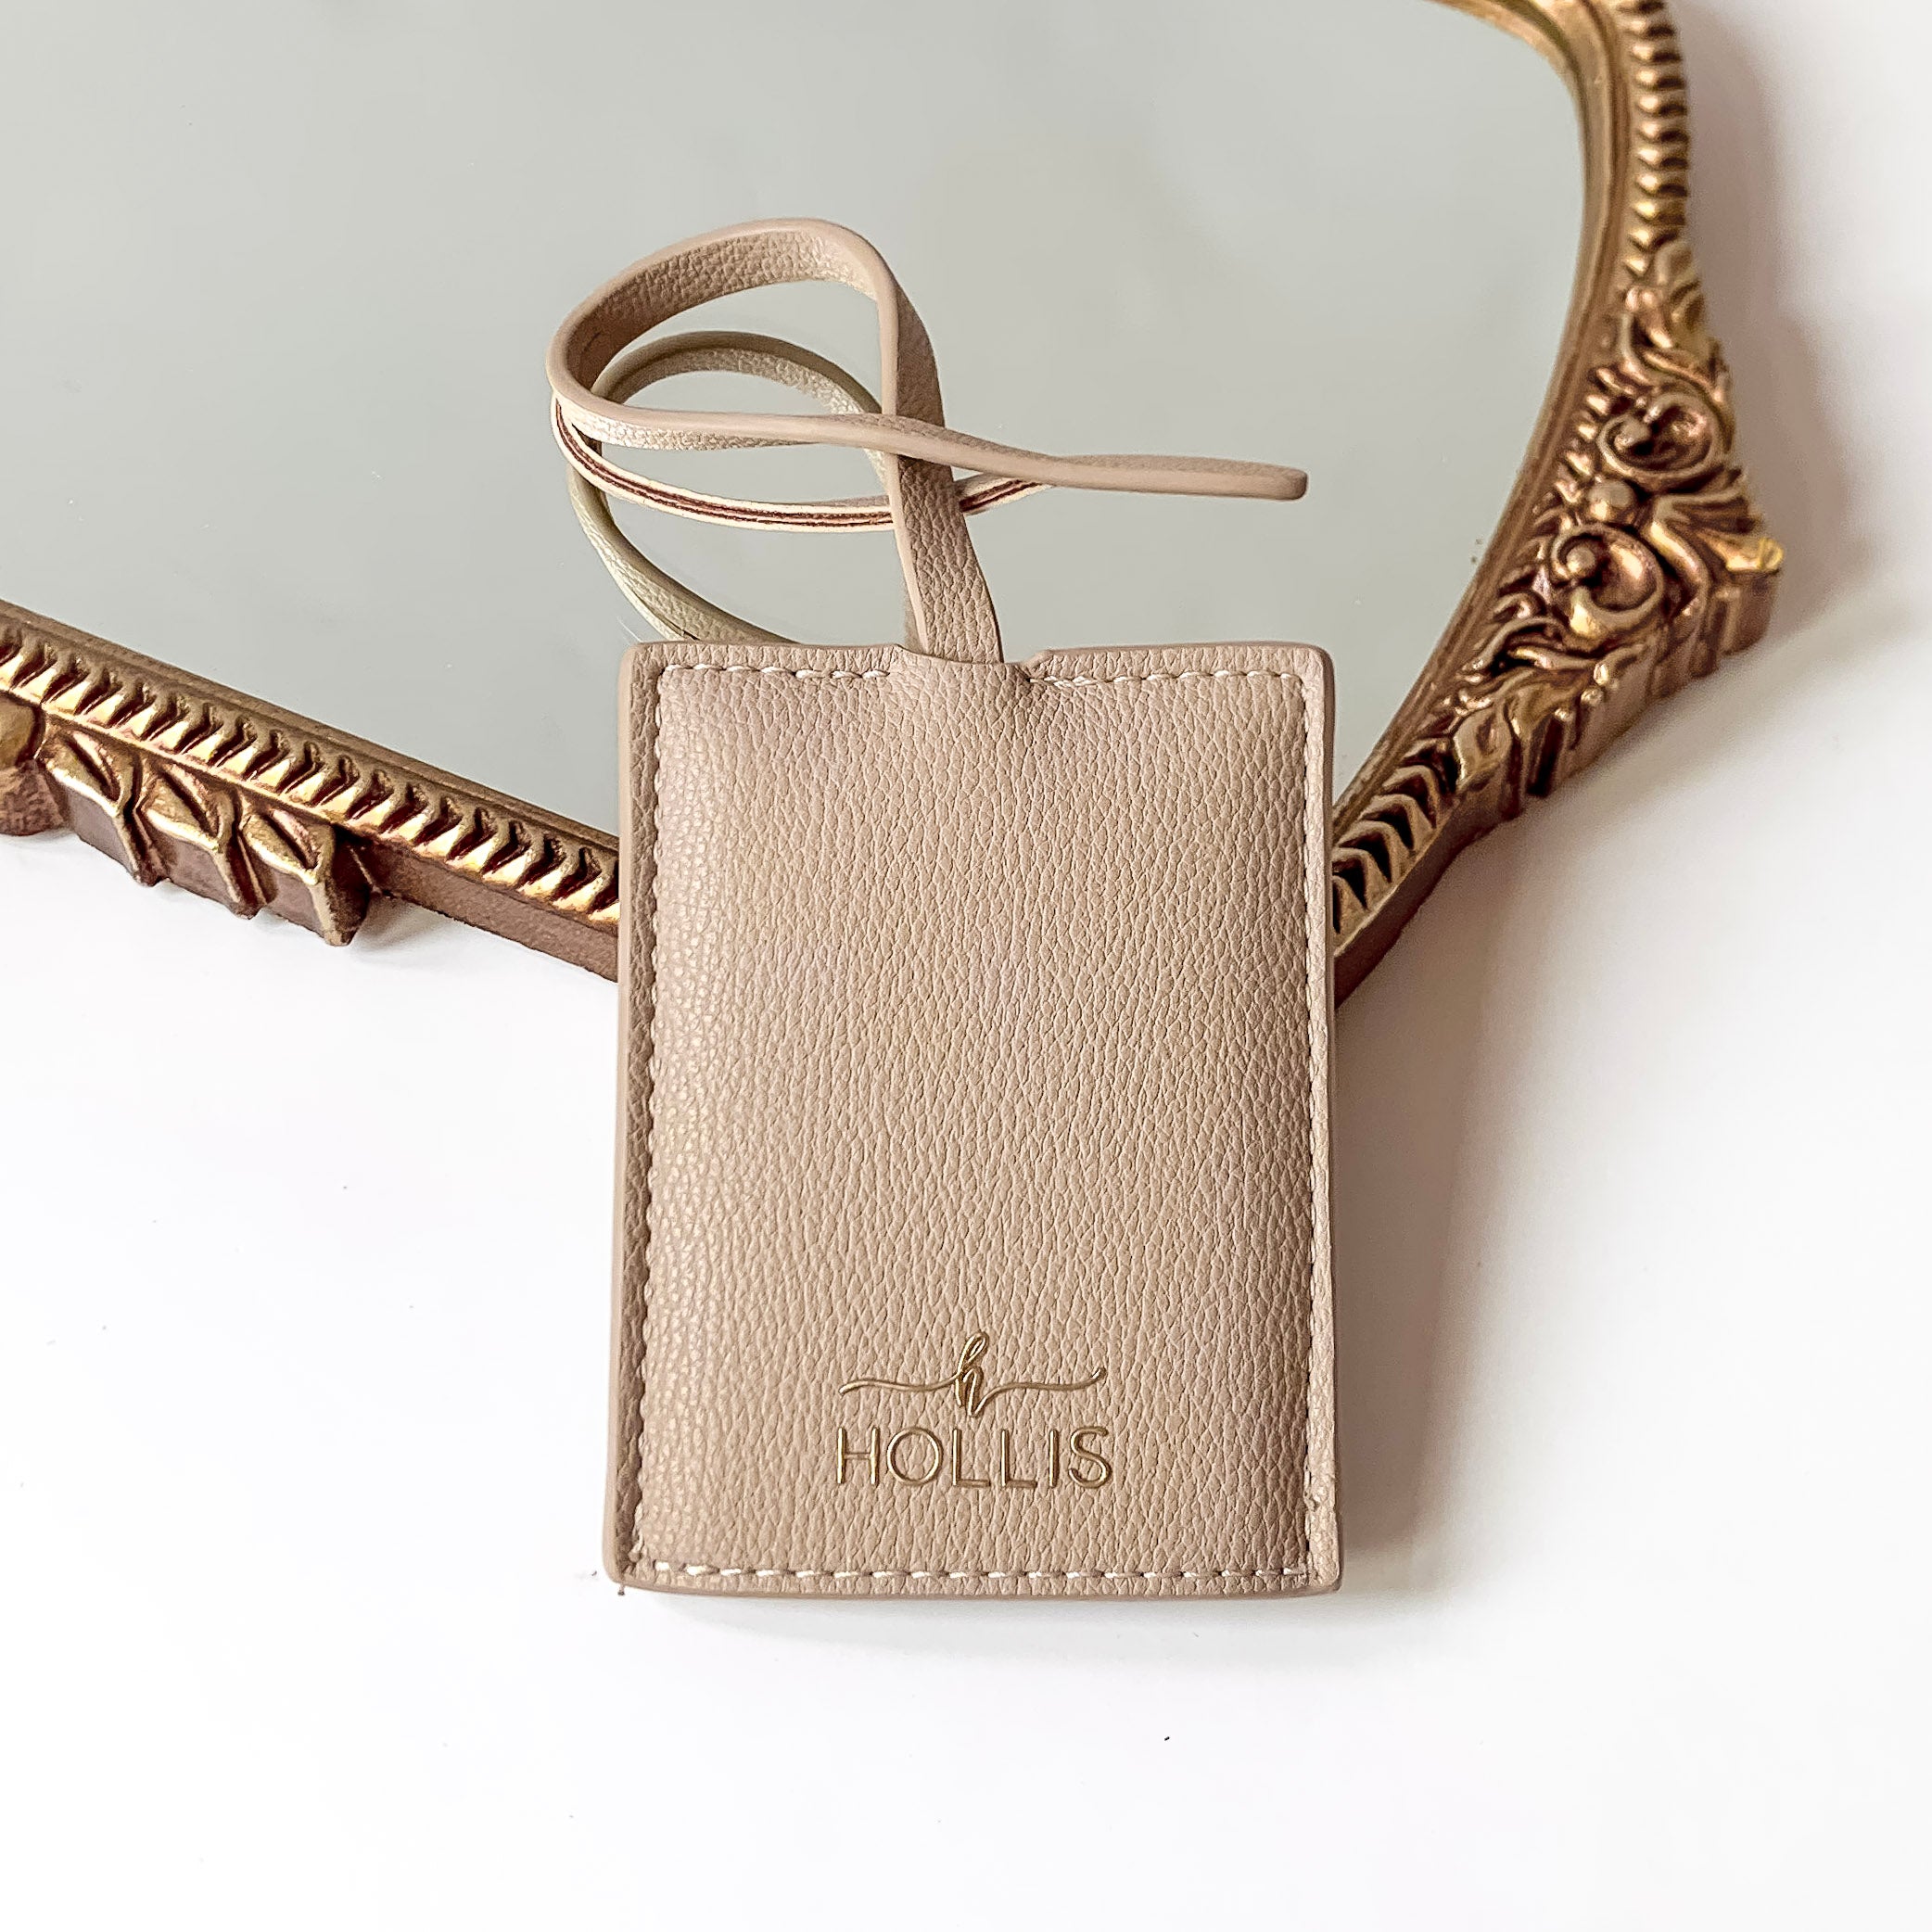 Nude luggage tag with a gold HOLLIS emblem at the bottom. This is pictured laying partially on a gold mirror on a white background.